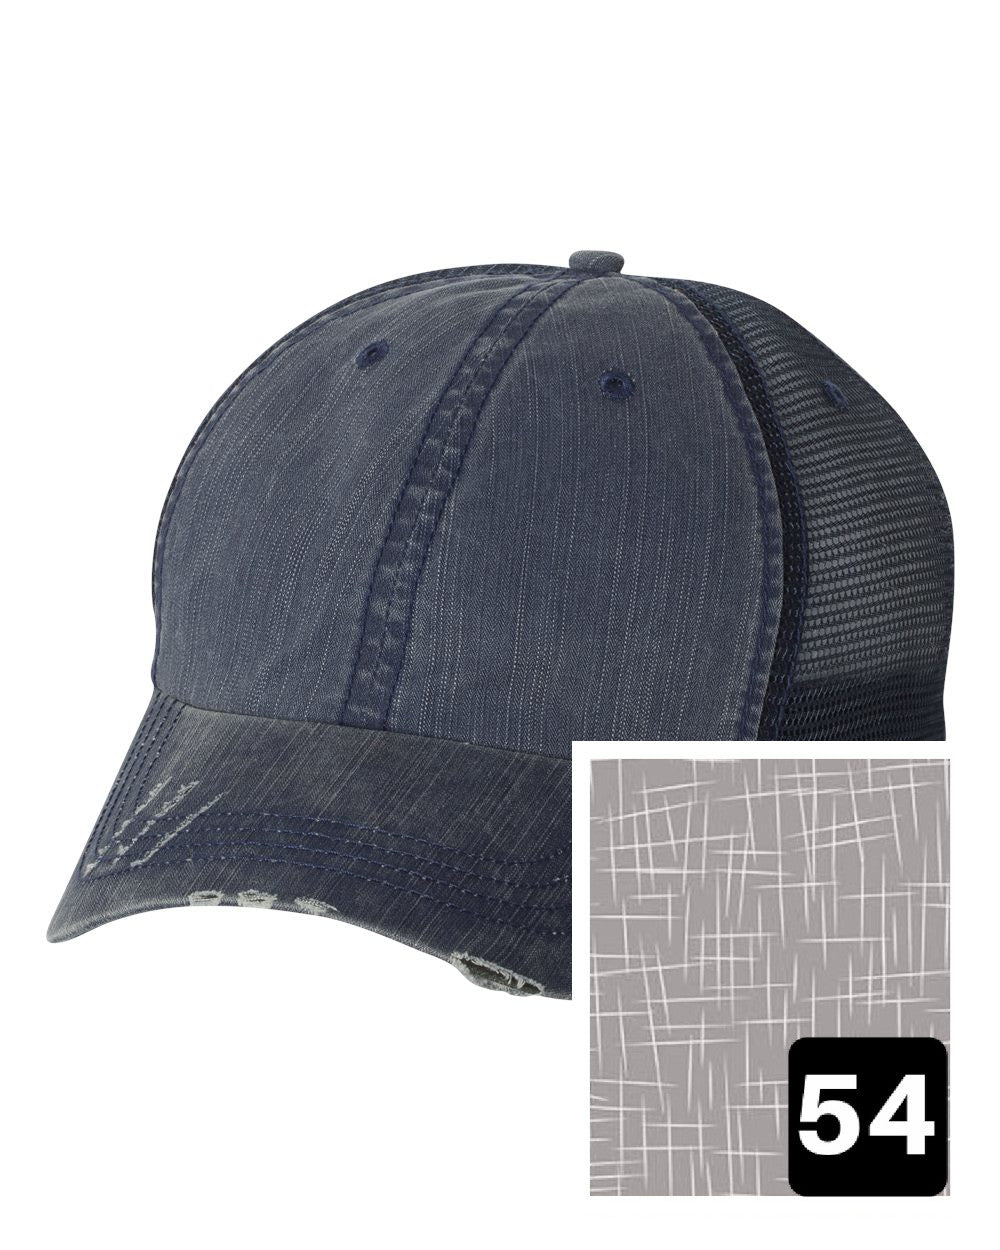 Illinois Hat | Navy Distressed Trucker Cap | Many Fabric Choices